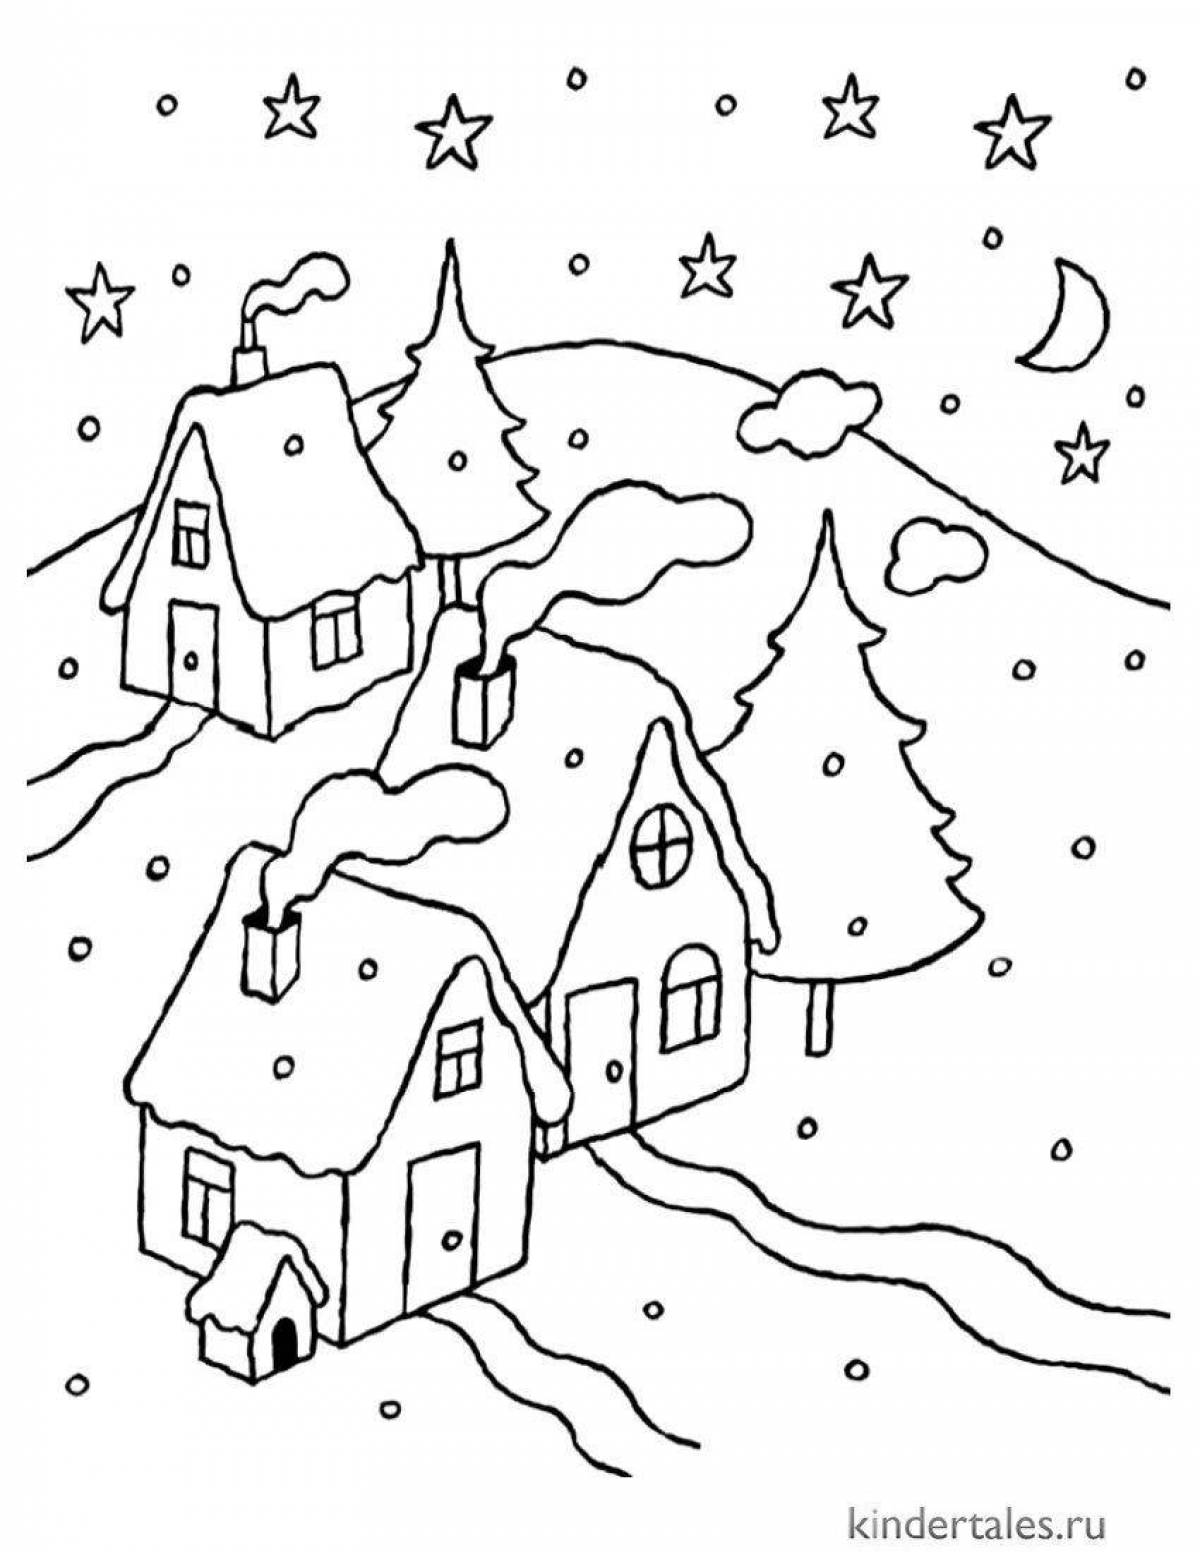 Glowing winter landscape coloring page